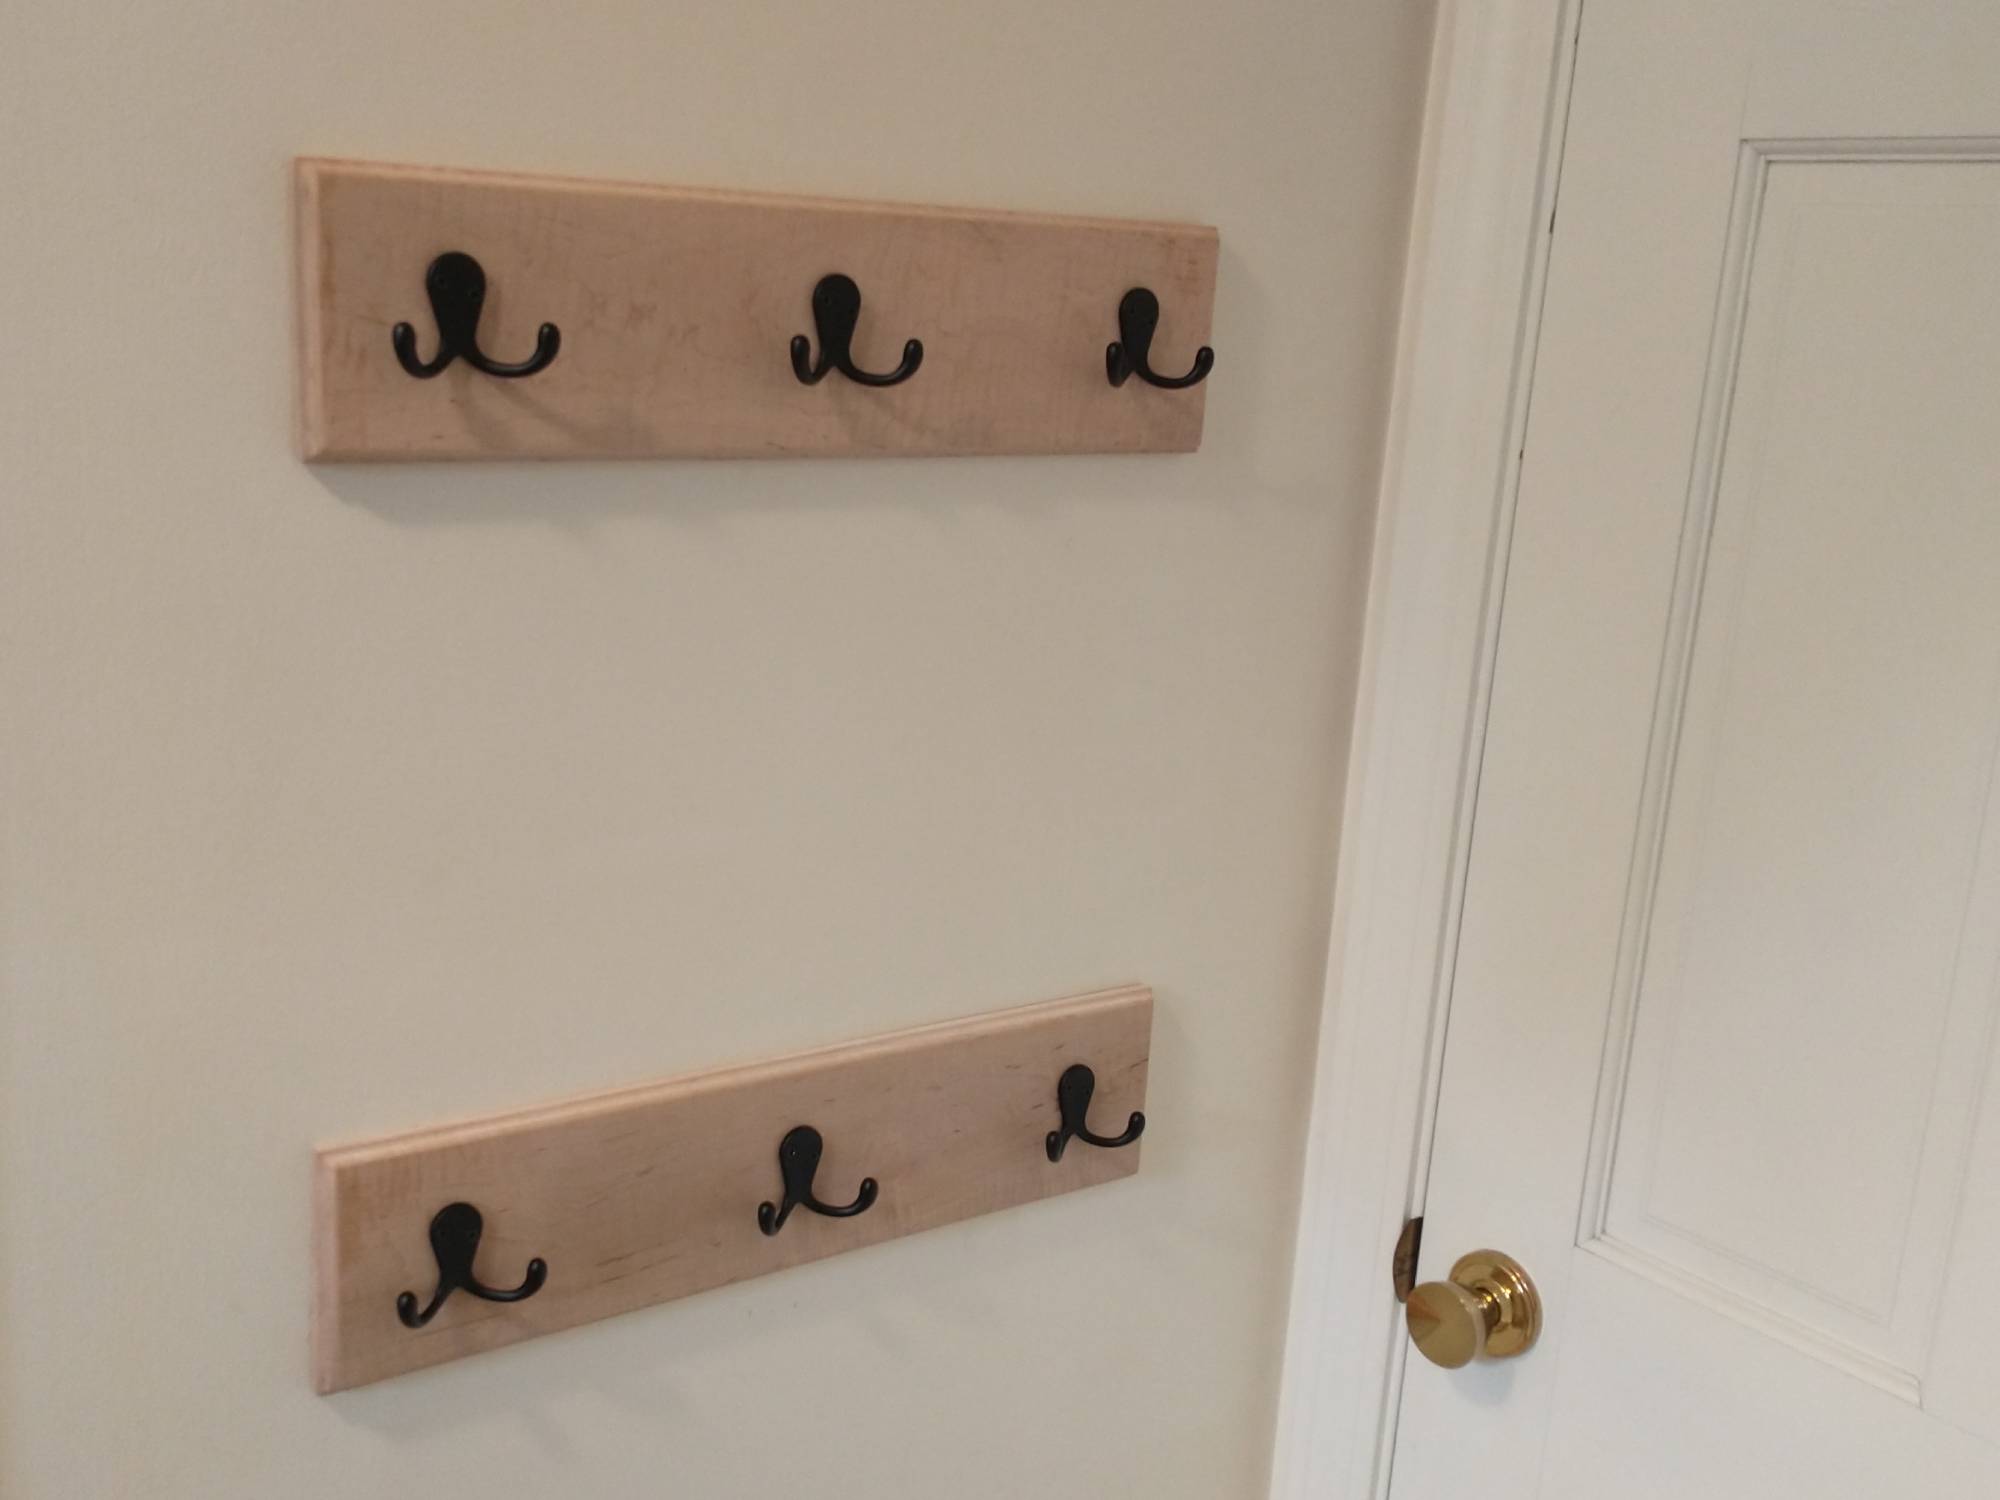 Hooks and coat hooks - how to install them, how high to hang them